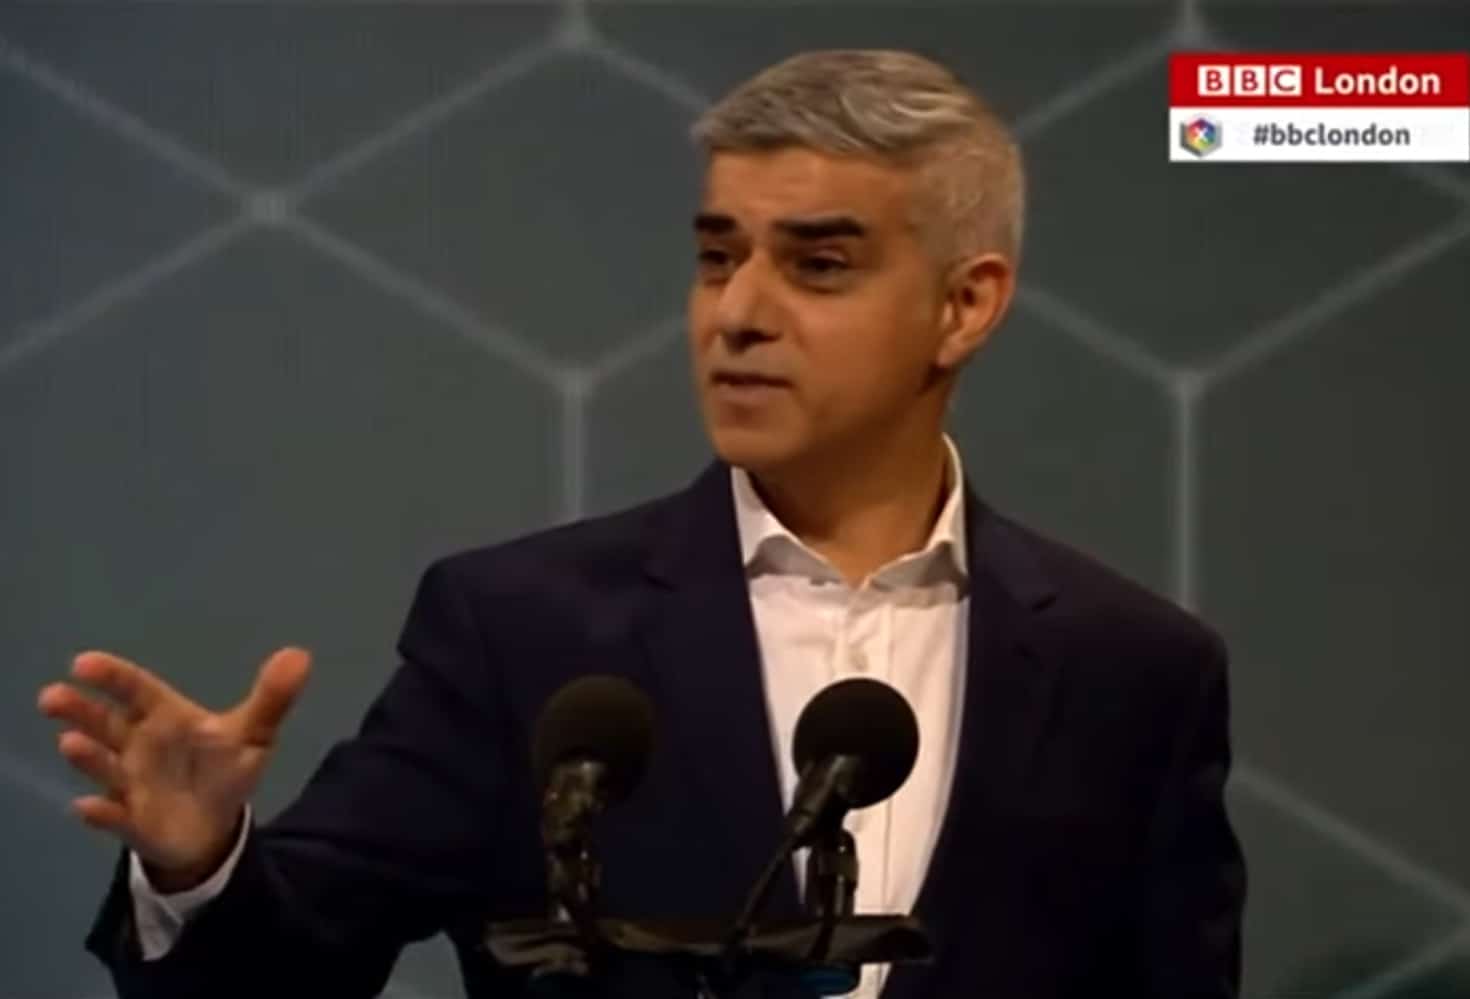 Khan slam dunks Bailey in final question of BBC mayoral debate